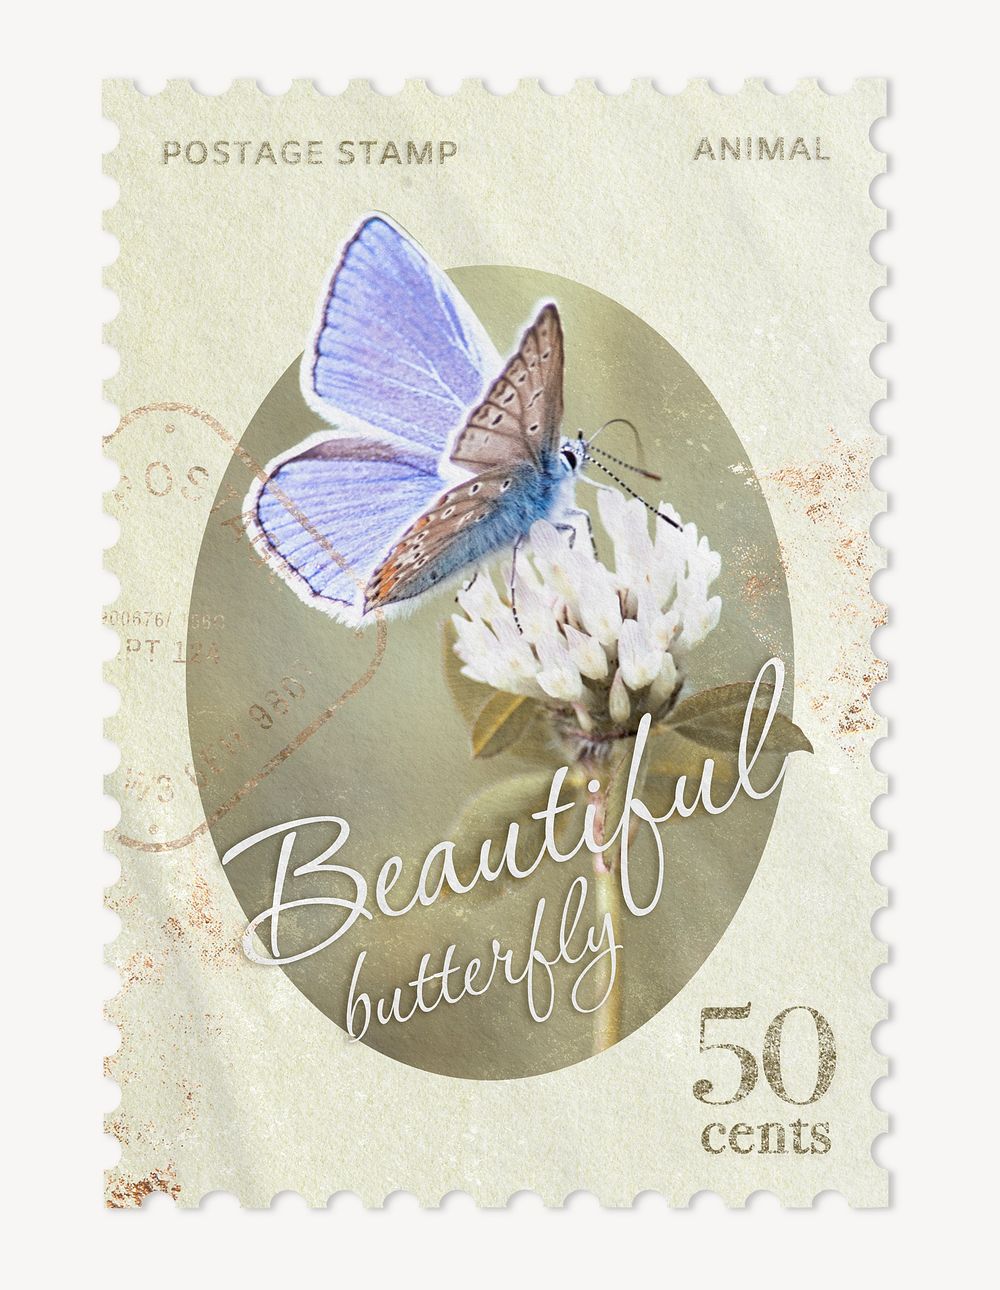 Butterfly postage stamp, animal graphic image